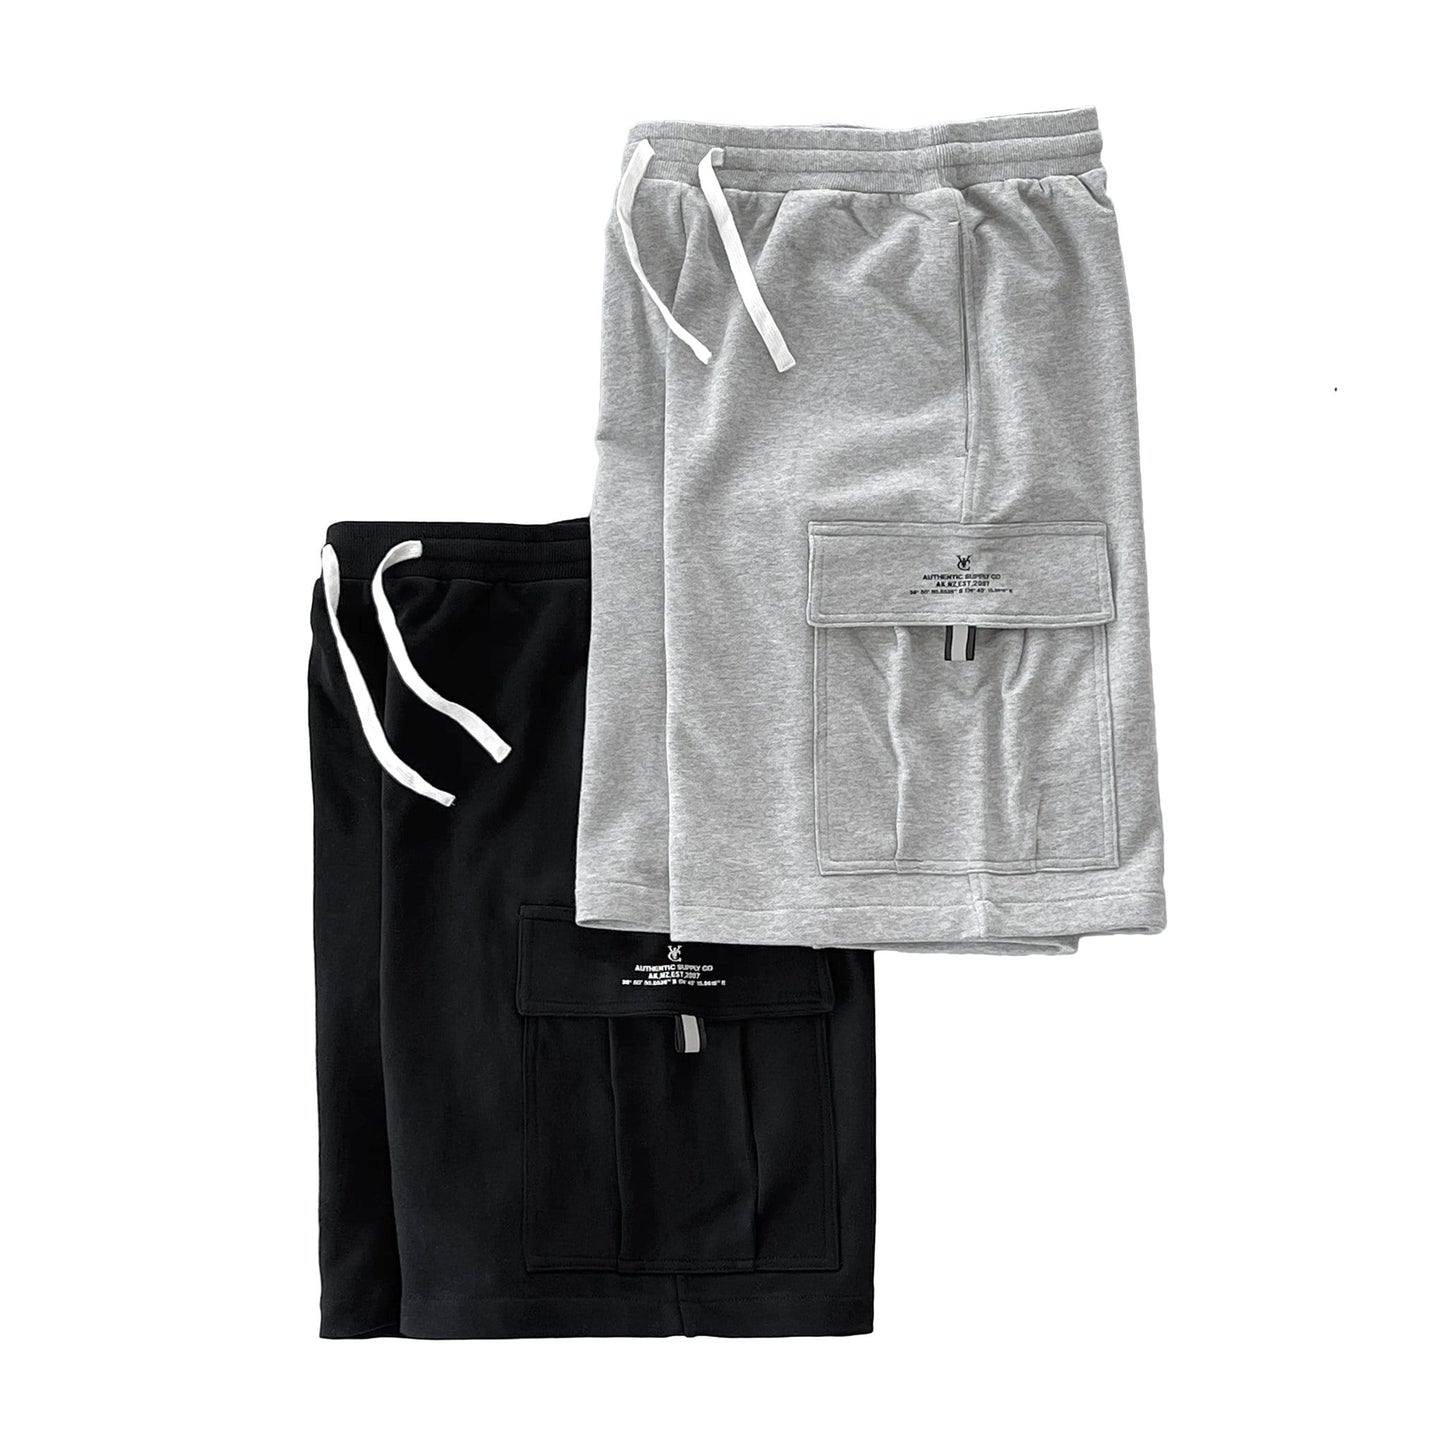 Heavyweight sweat cargo track shorts by New Zealand skate and streetwear clothing label VIC Apparel. Loose baggy fit. Screen printed logo. Reflective pull on cargo pocket flap.